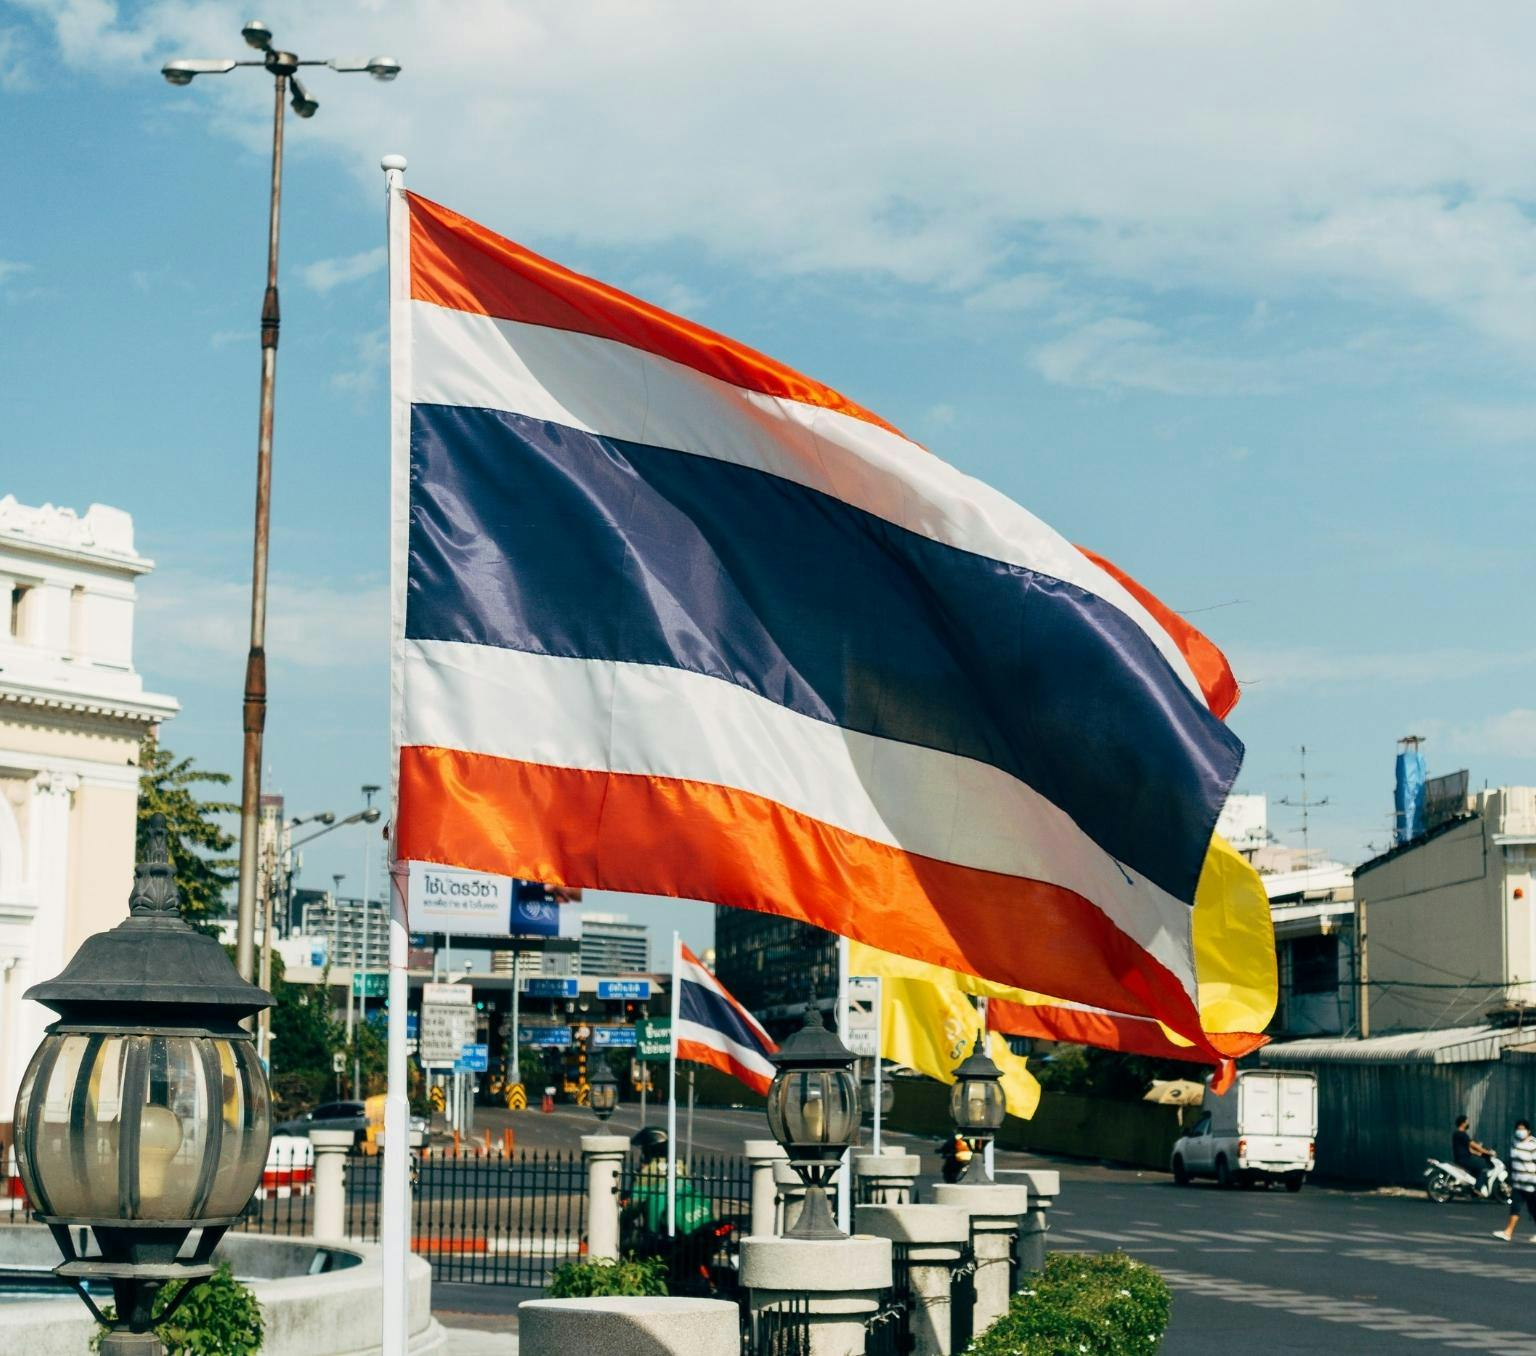 Thai flag which has red white and blue stripes is pictured on a flag pole in front of a city street